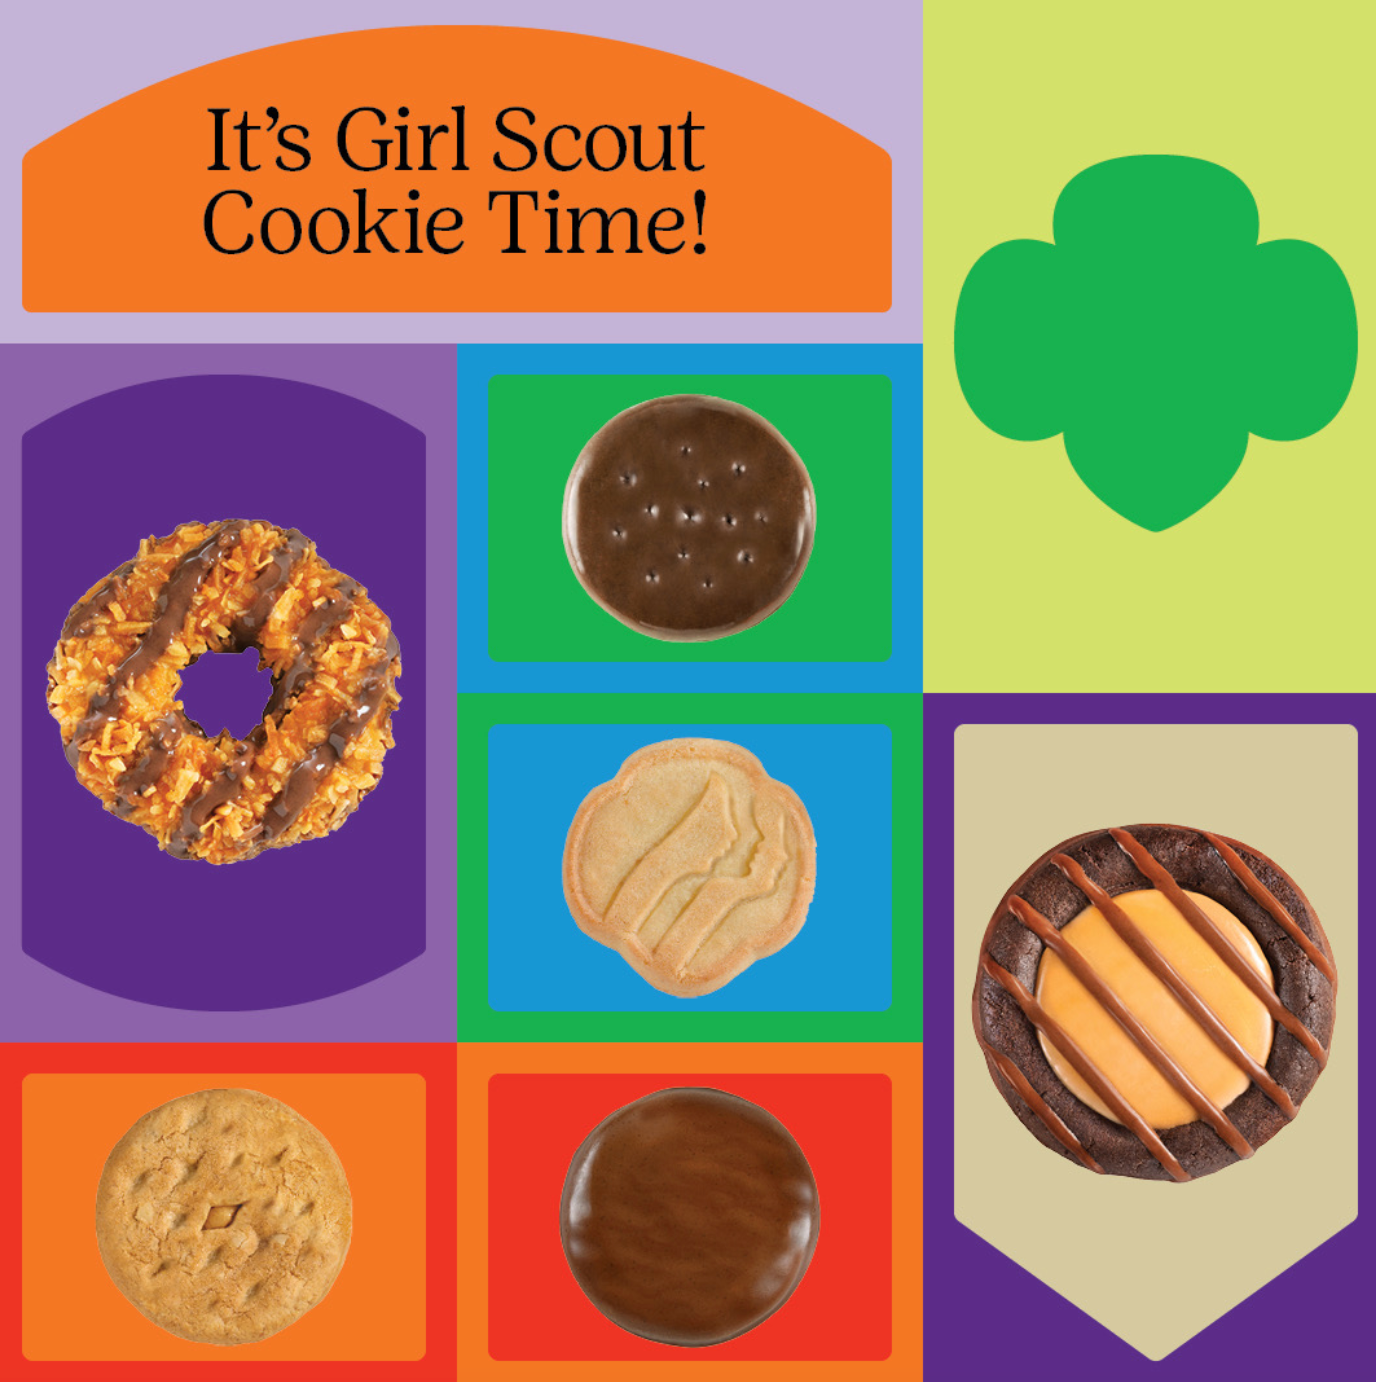 Where Does the Money From Girl Scout Cookie Sales Go?